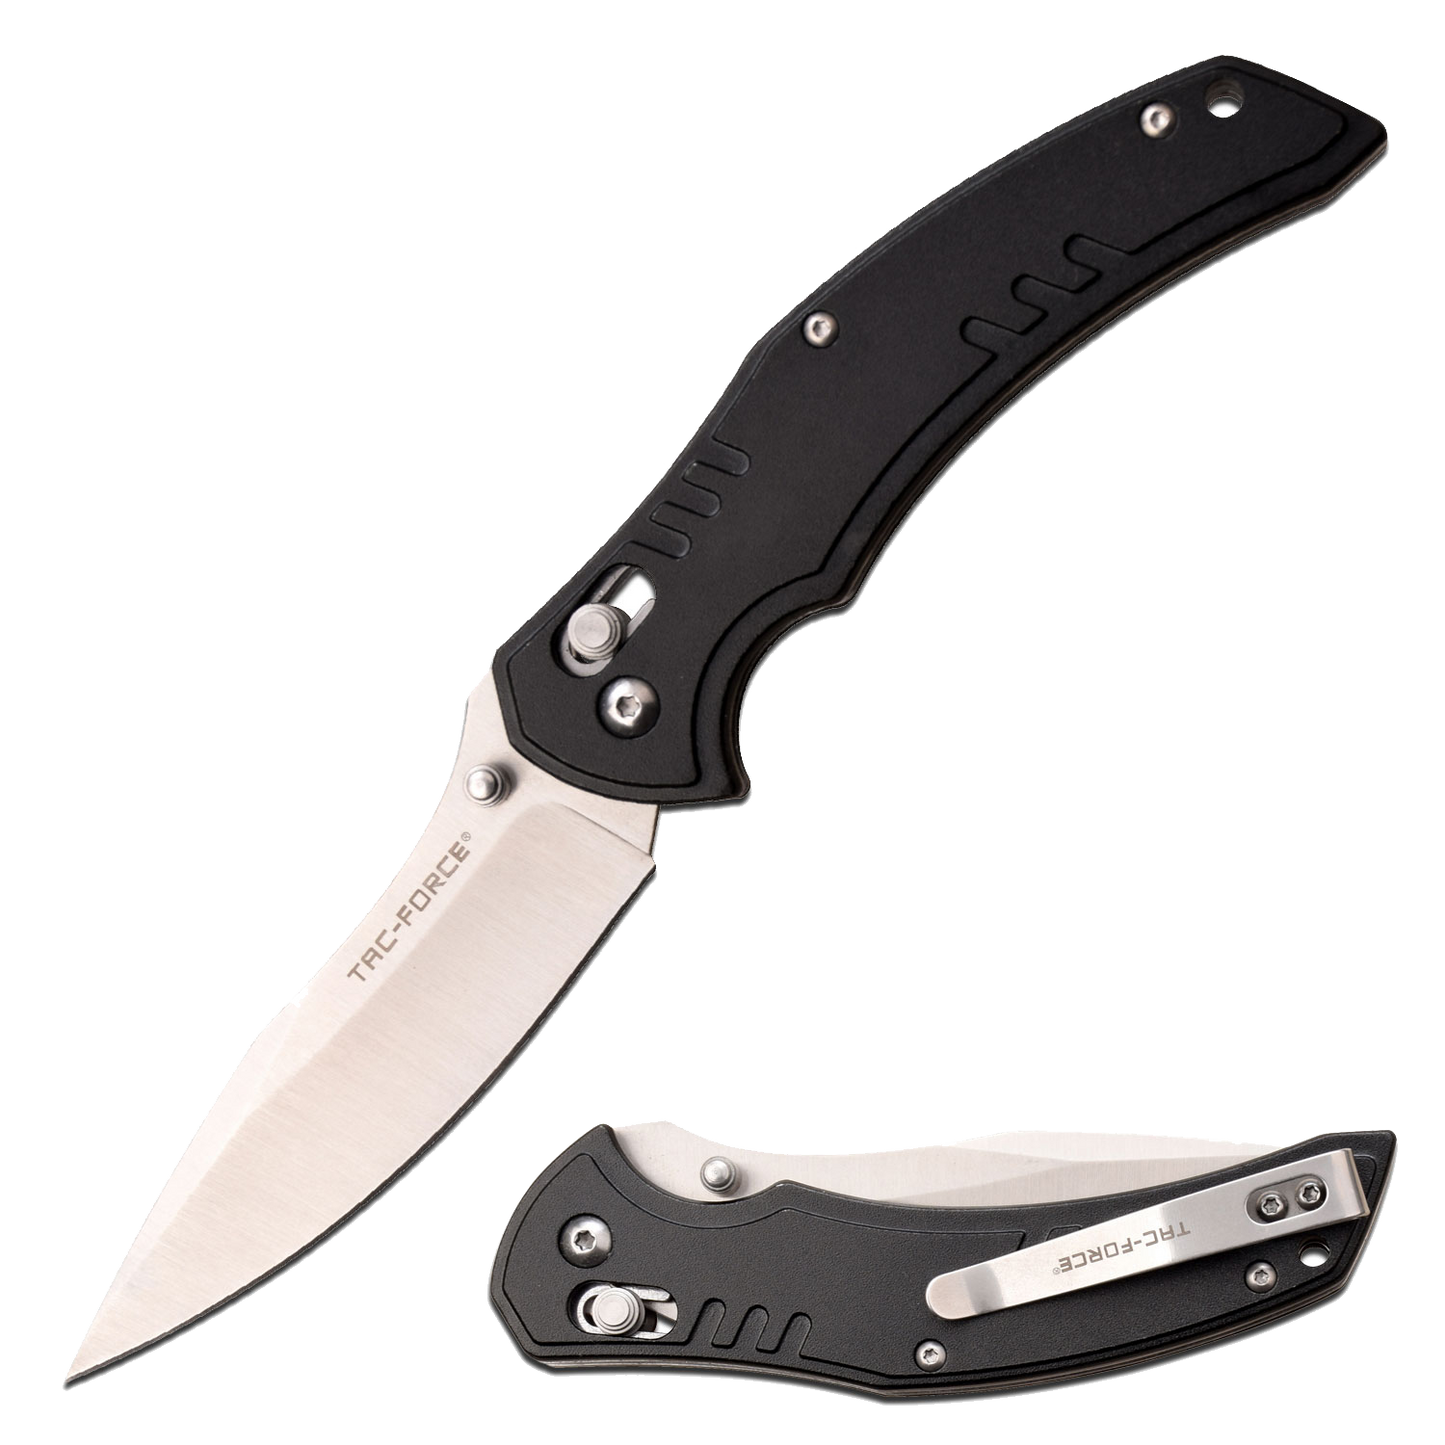 Tac-Force Tac-Force Tactical Portable Drop Point Folding Knife - 8 Inch Overall Satin Blade #tf-1036S Antique White